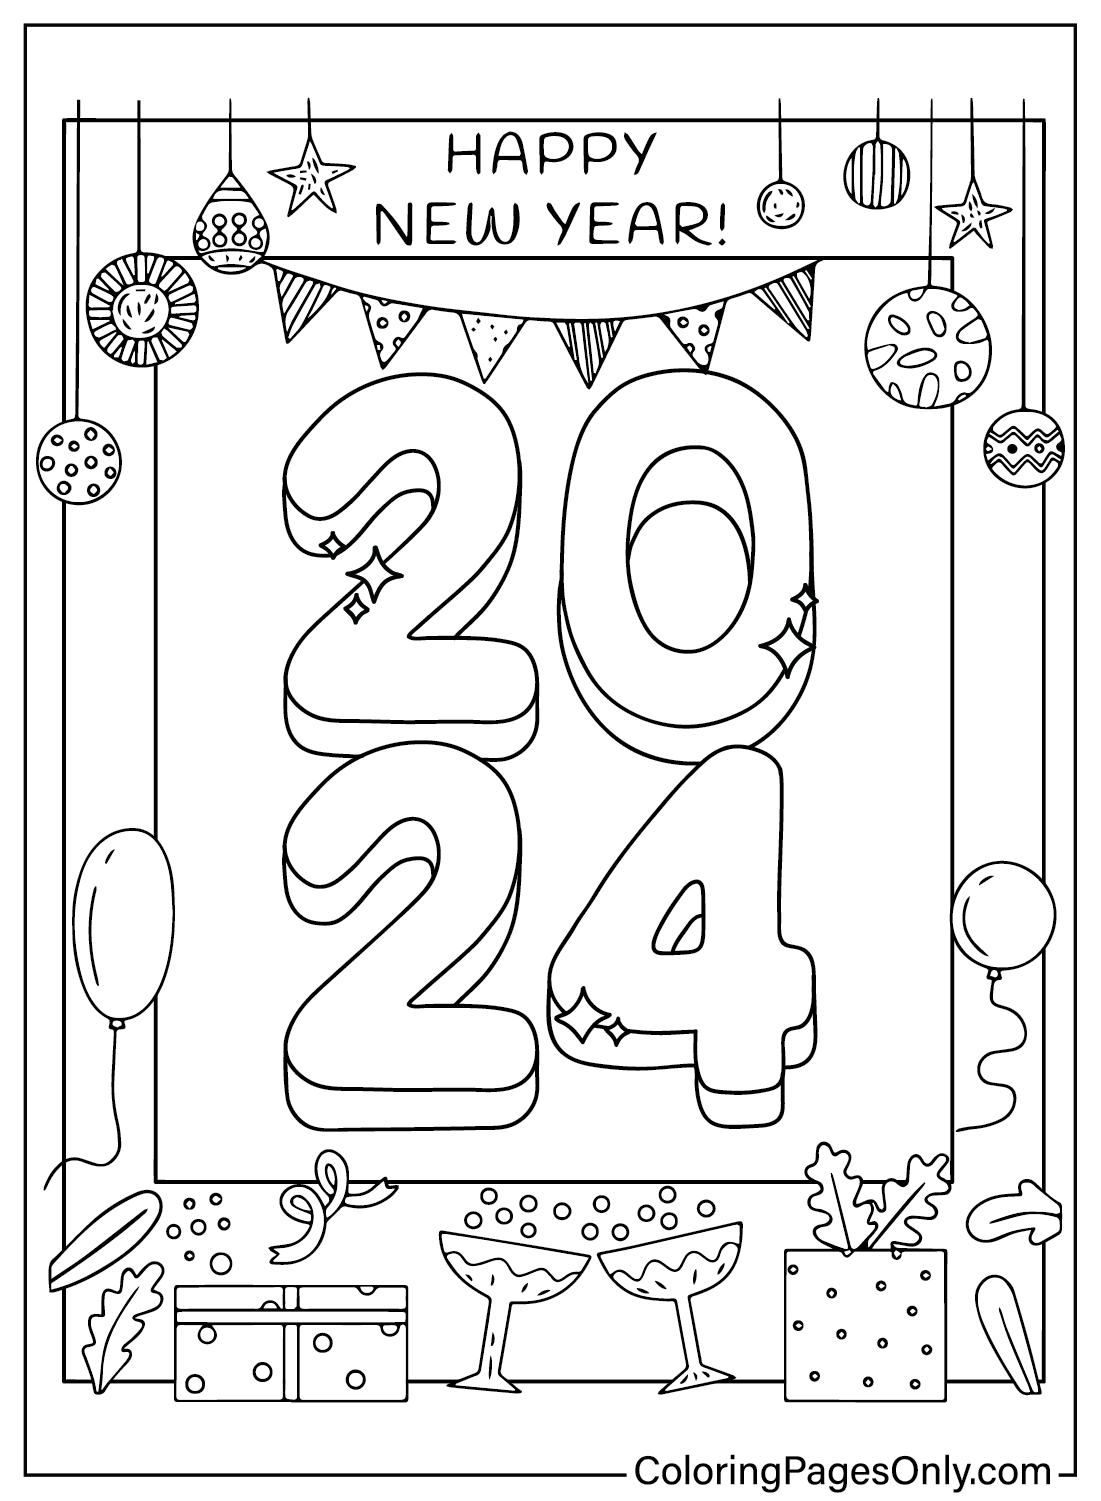 Coloring Pages Only on X: 